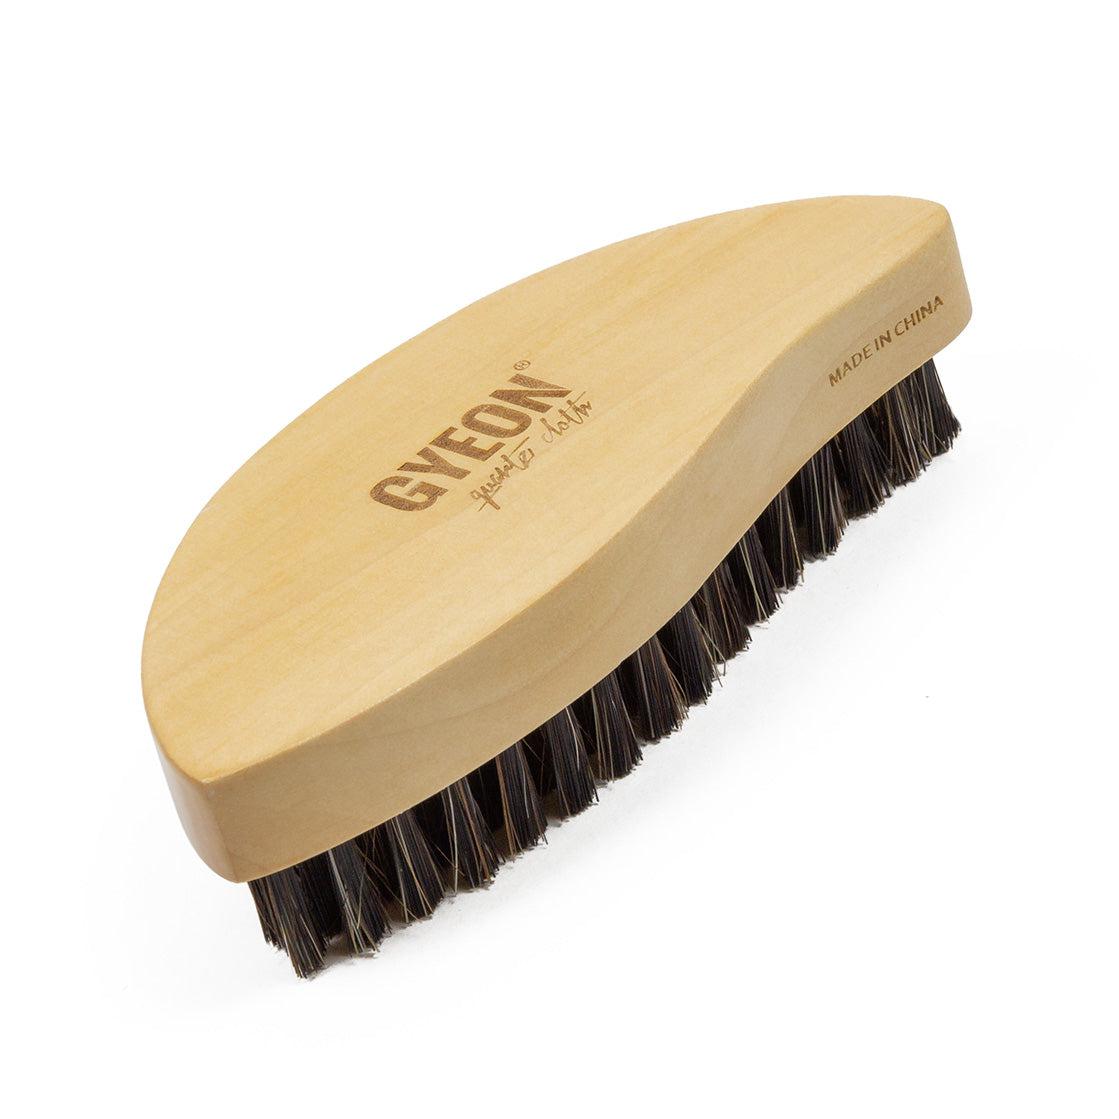 GYEON Q²M Leather cleaner strong & mild 0,5 L + LeatherBrush +  Microfasertuch